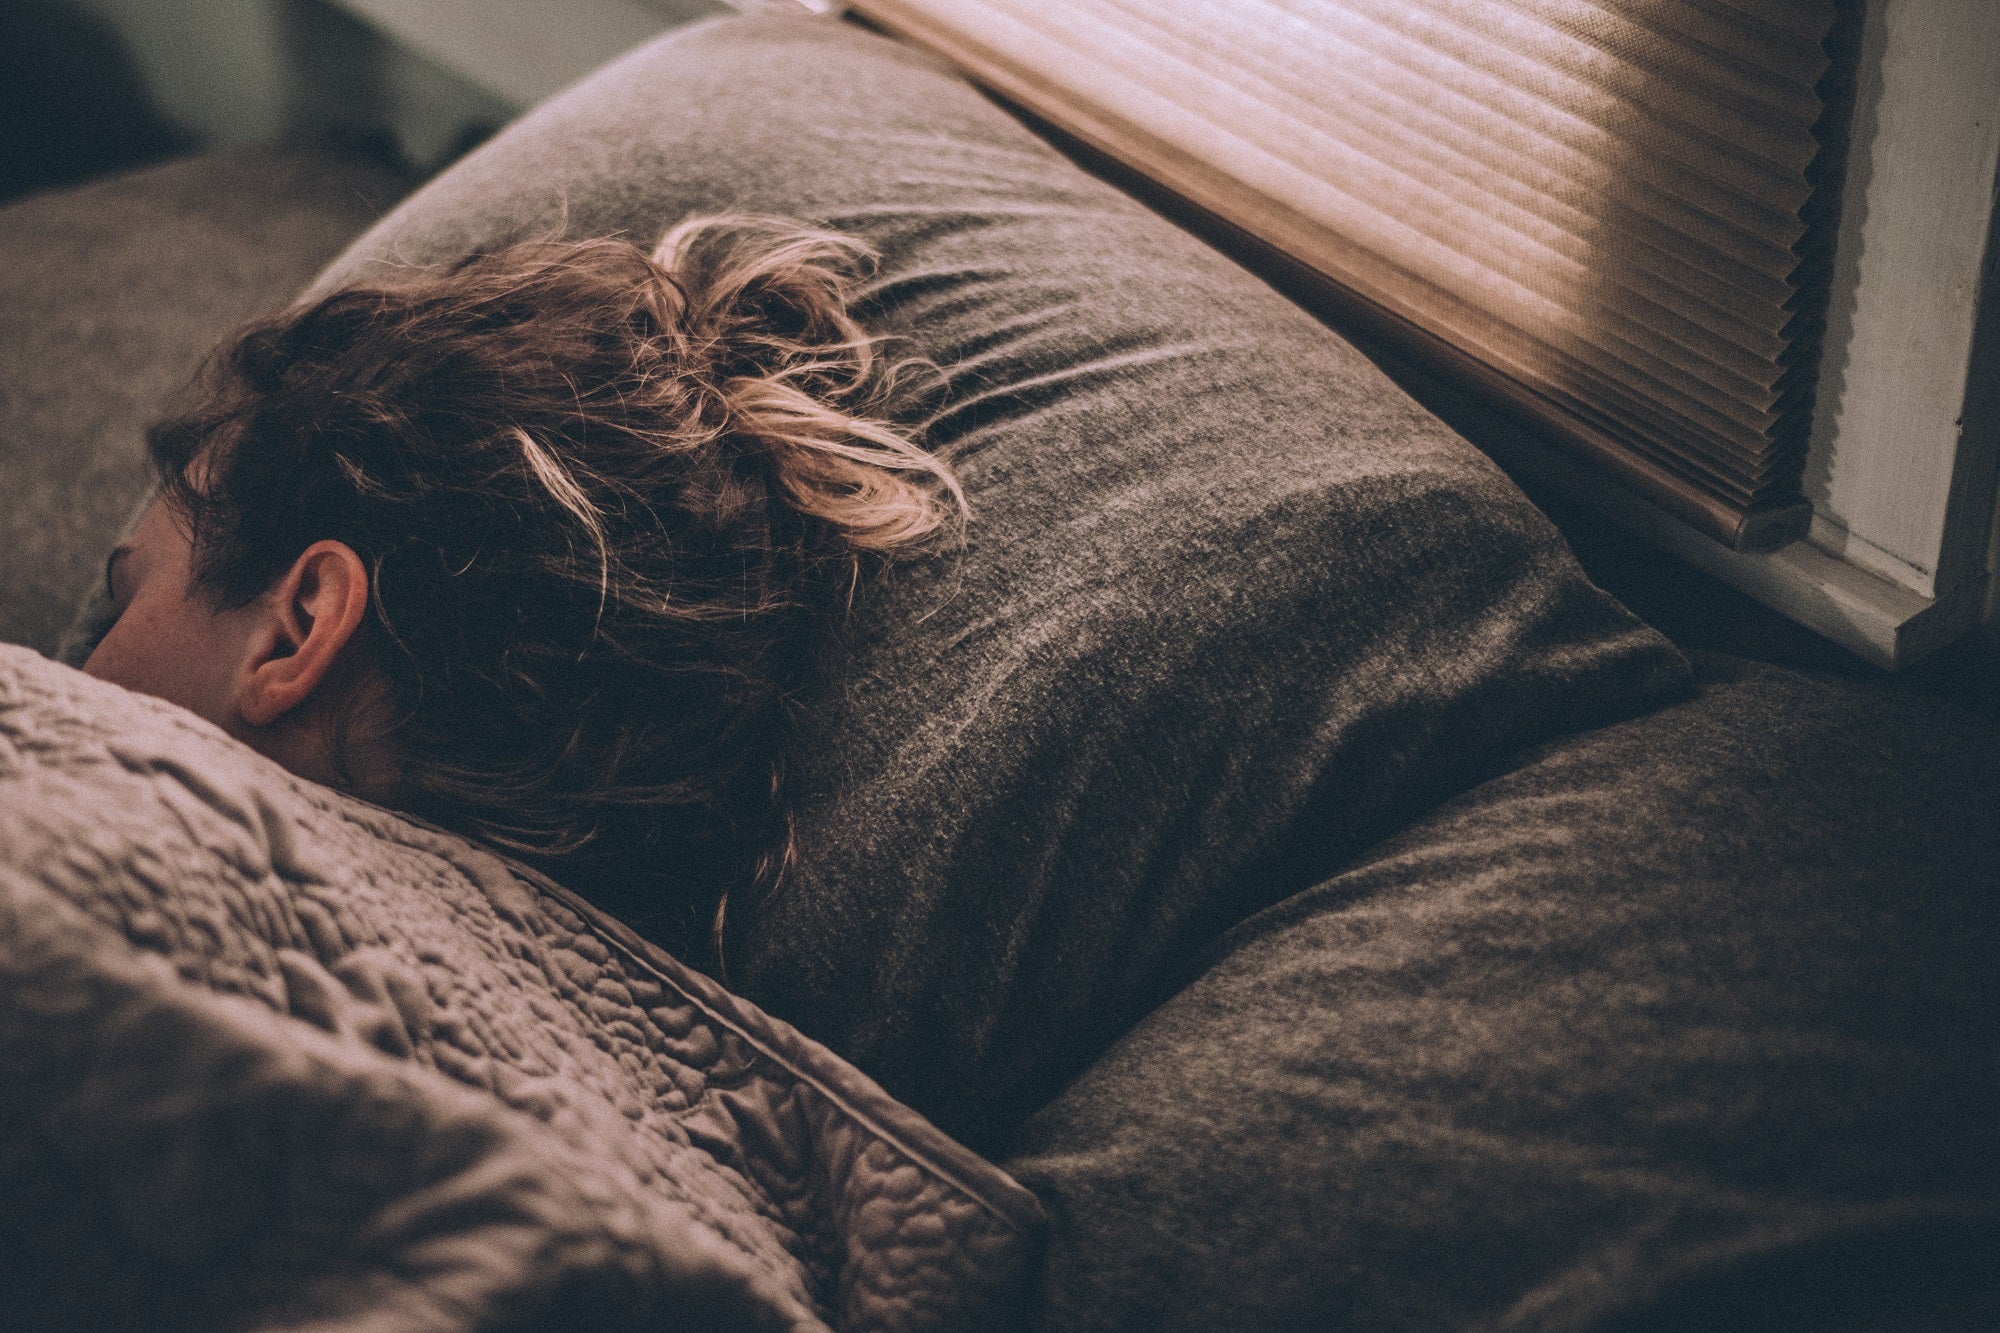 Prioritising sleep is one of the best ways to combat the January Blues.